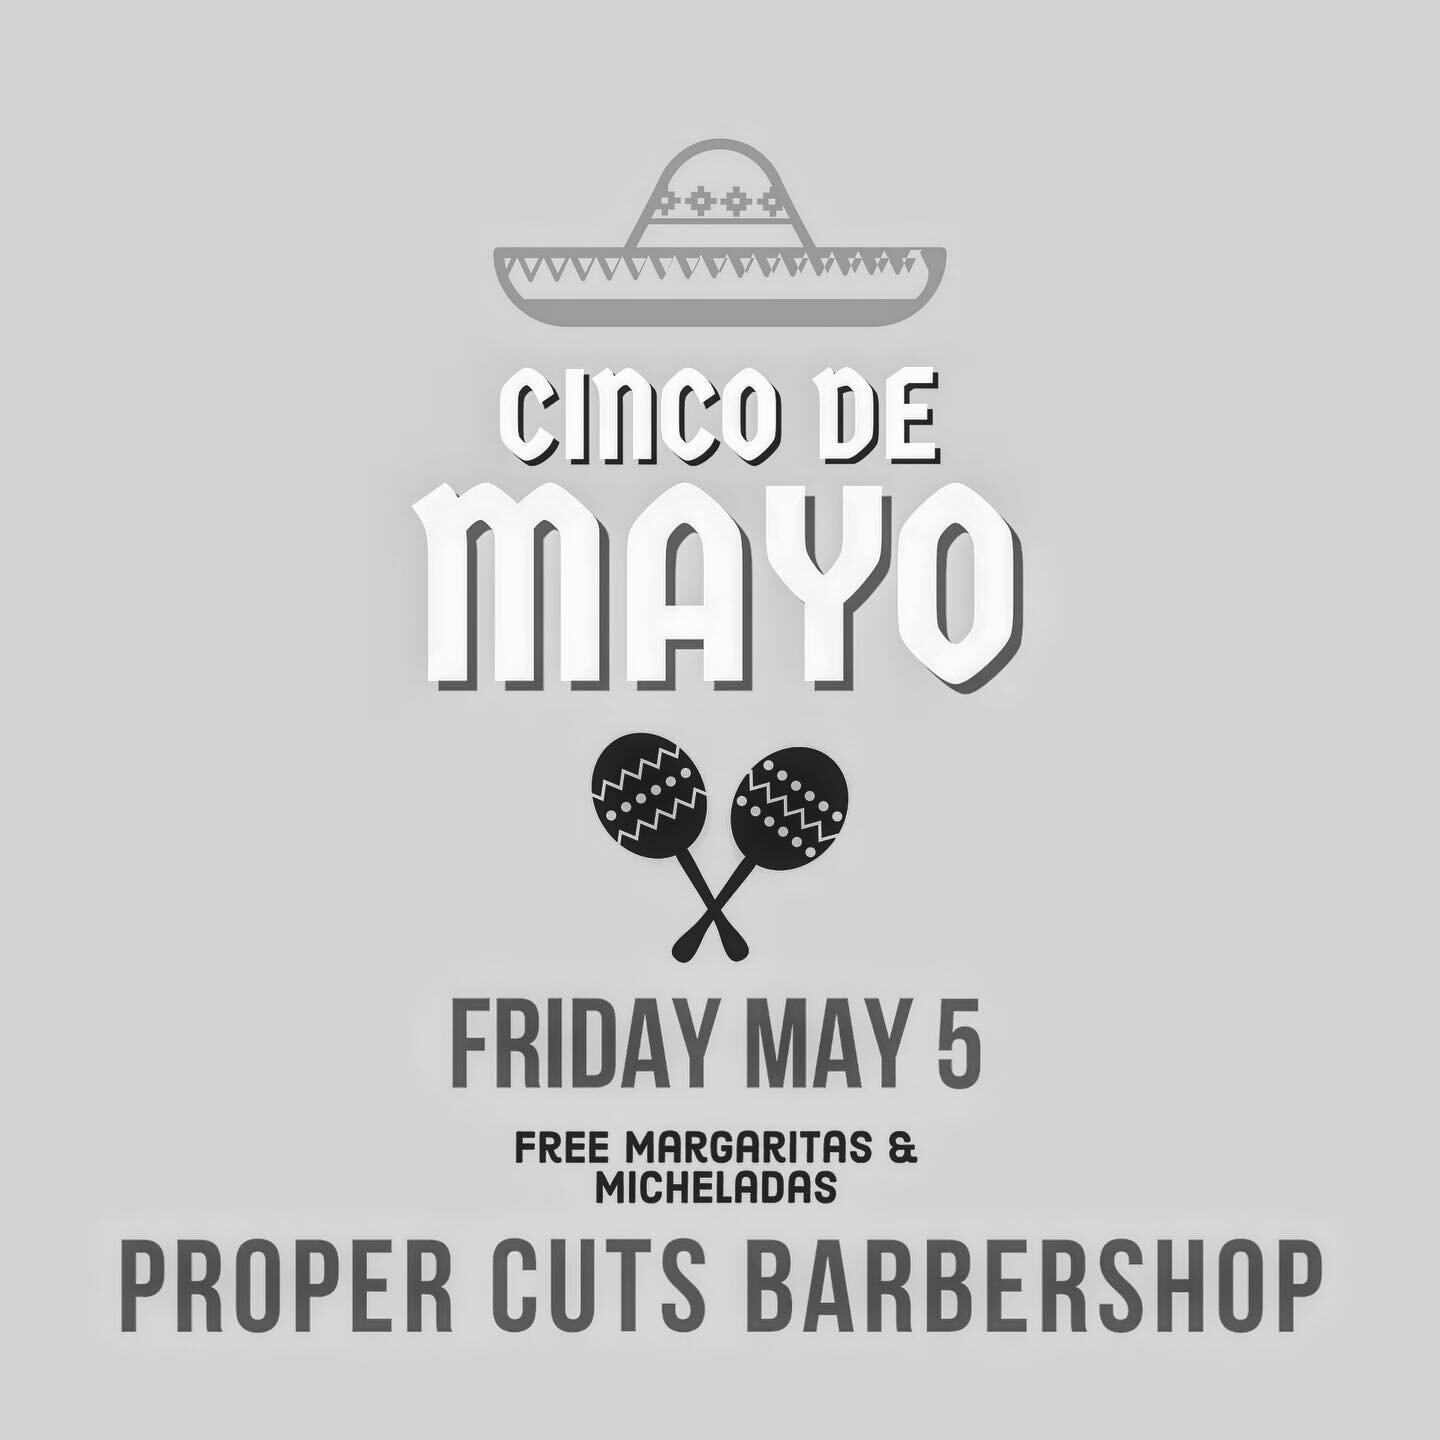 Happ friday Proper cuts family ! 

We will be having free drink for our clients friday cinco de drinko! 

May 5 
5 de mayo ! 

Come on by get cut ! Or come hang out with the team. 

#sanjose#sanjosebarbers